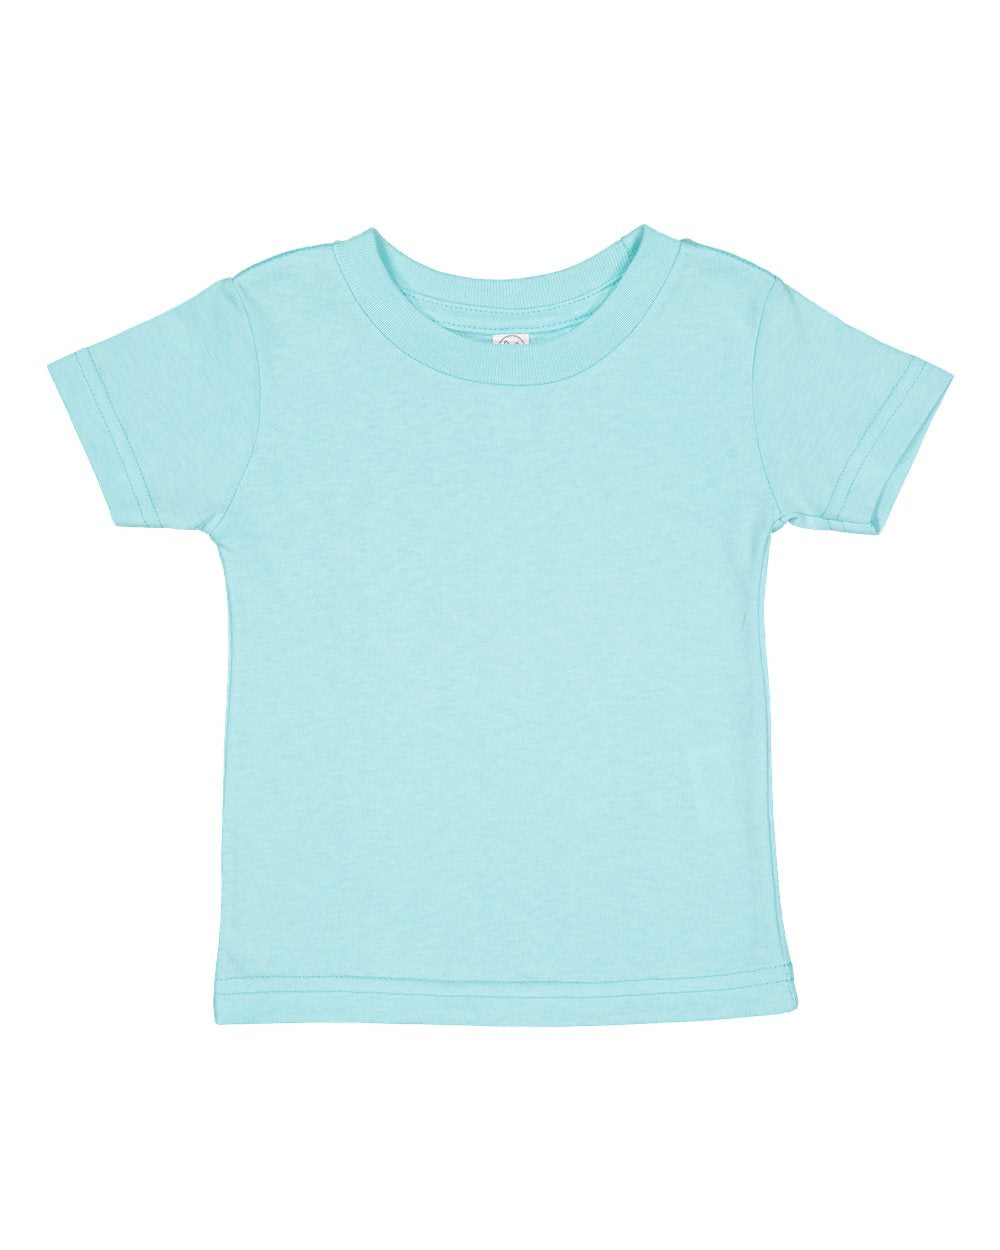 rabbit skins infant cotton jersey tee chill blue